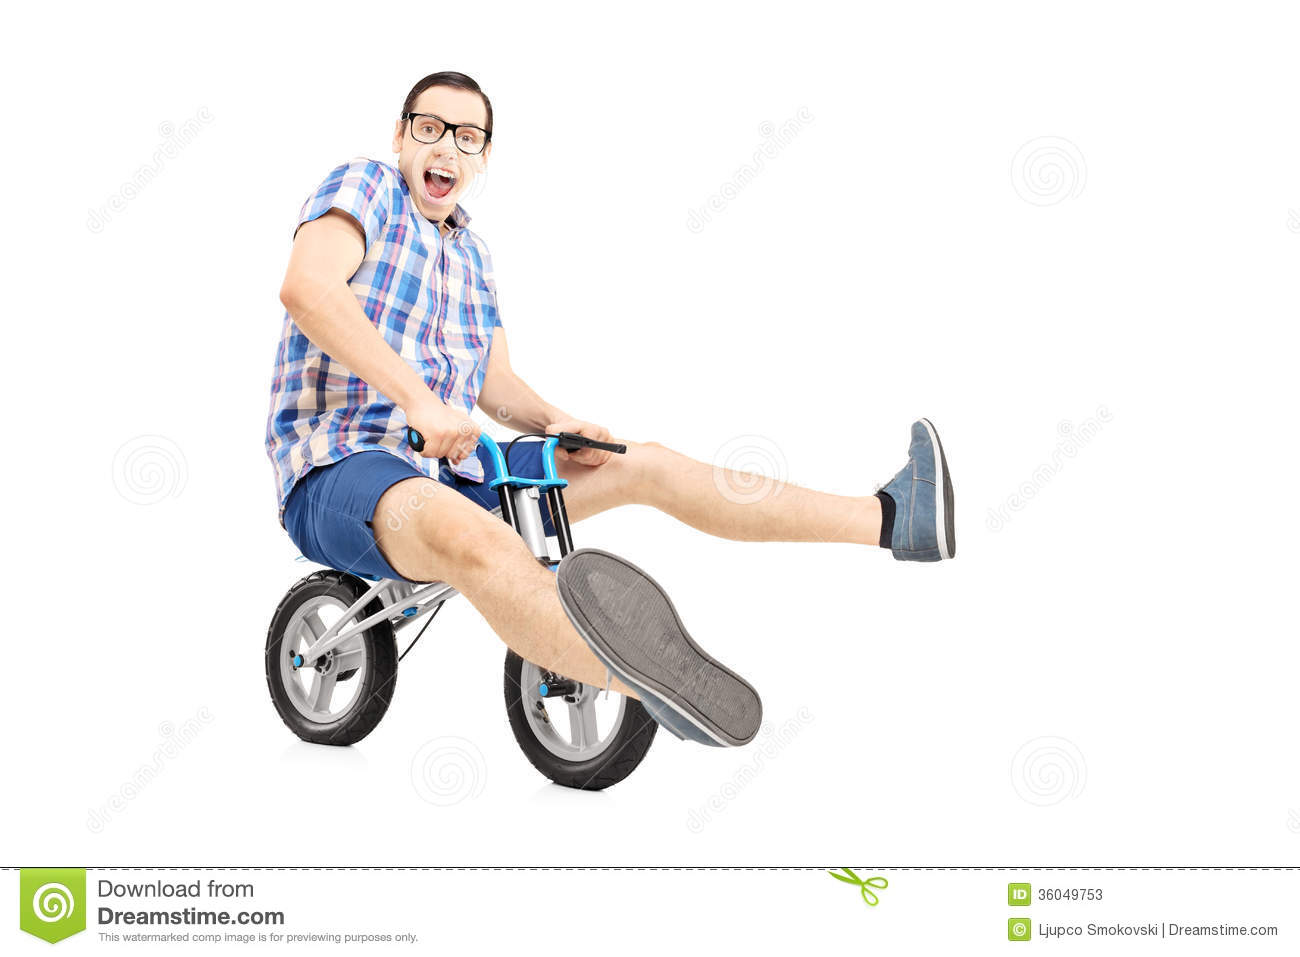 Man Riding Small Bicycle Funny Picture